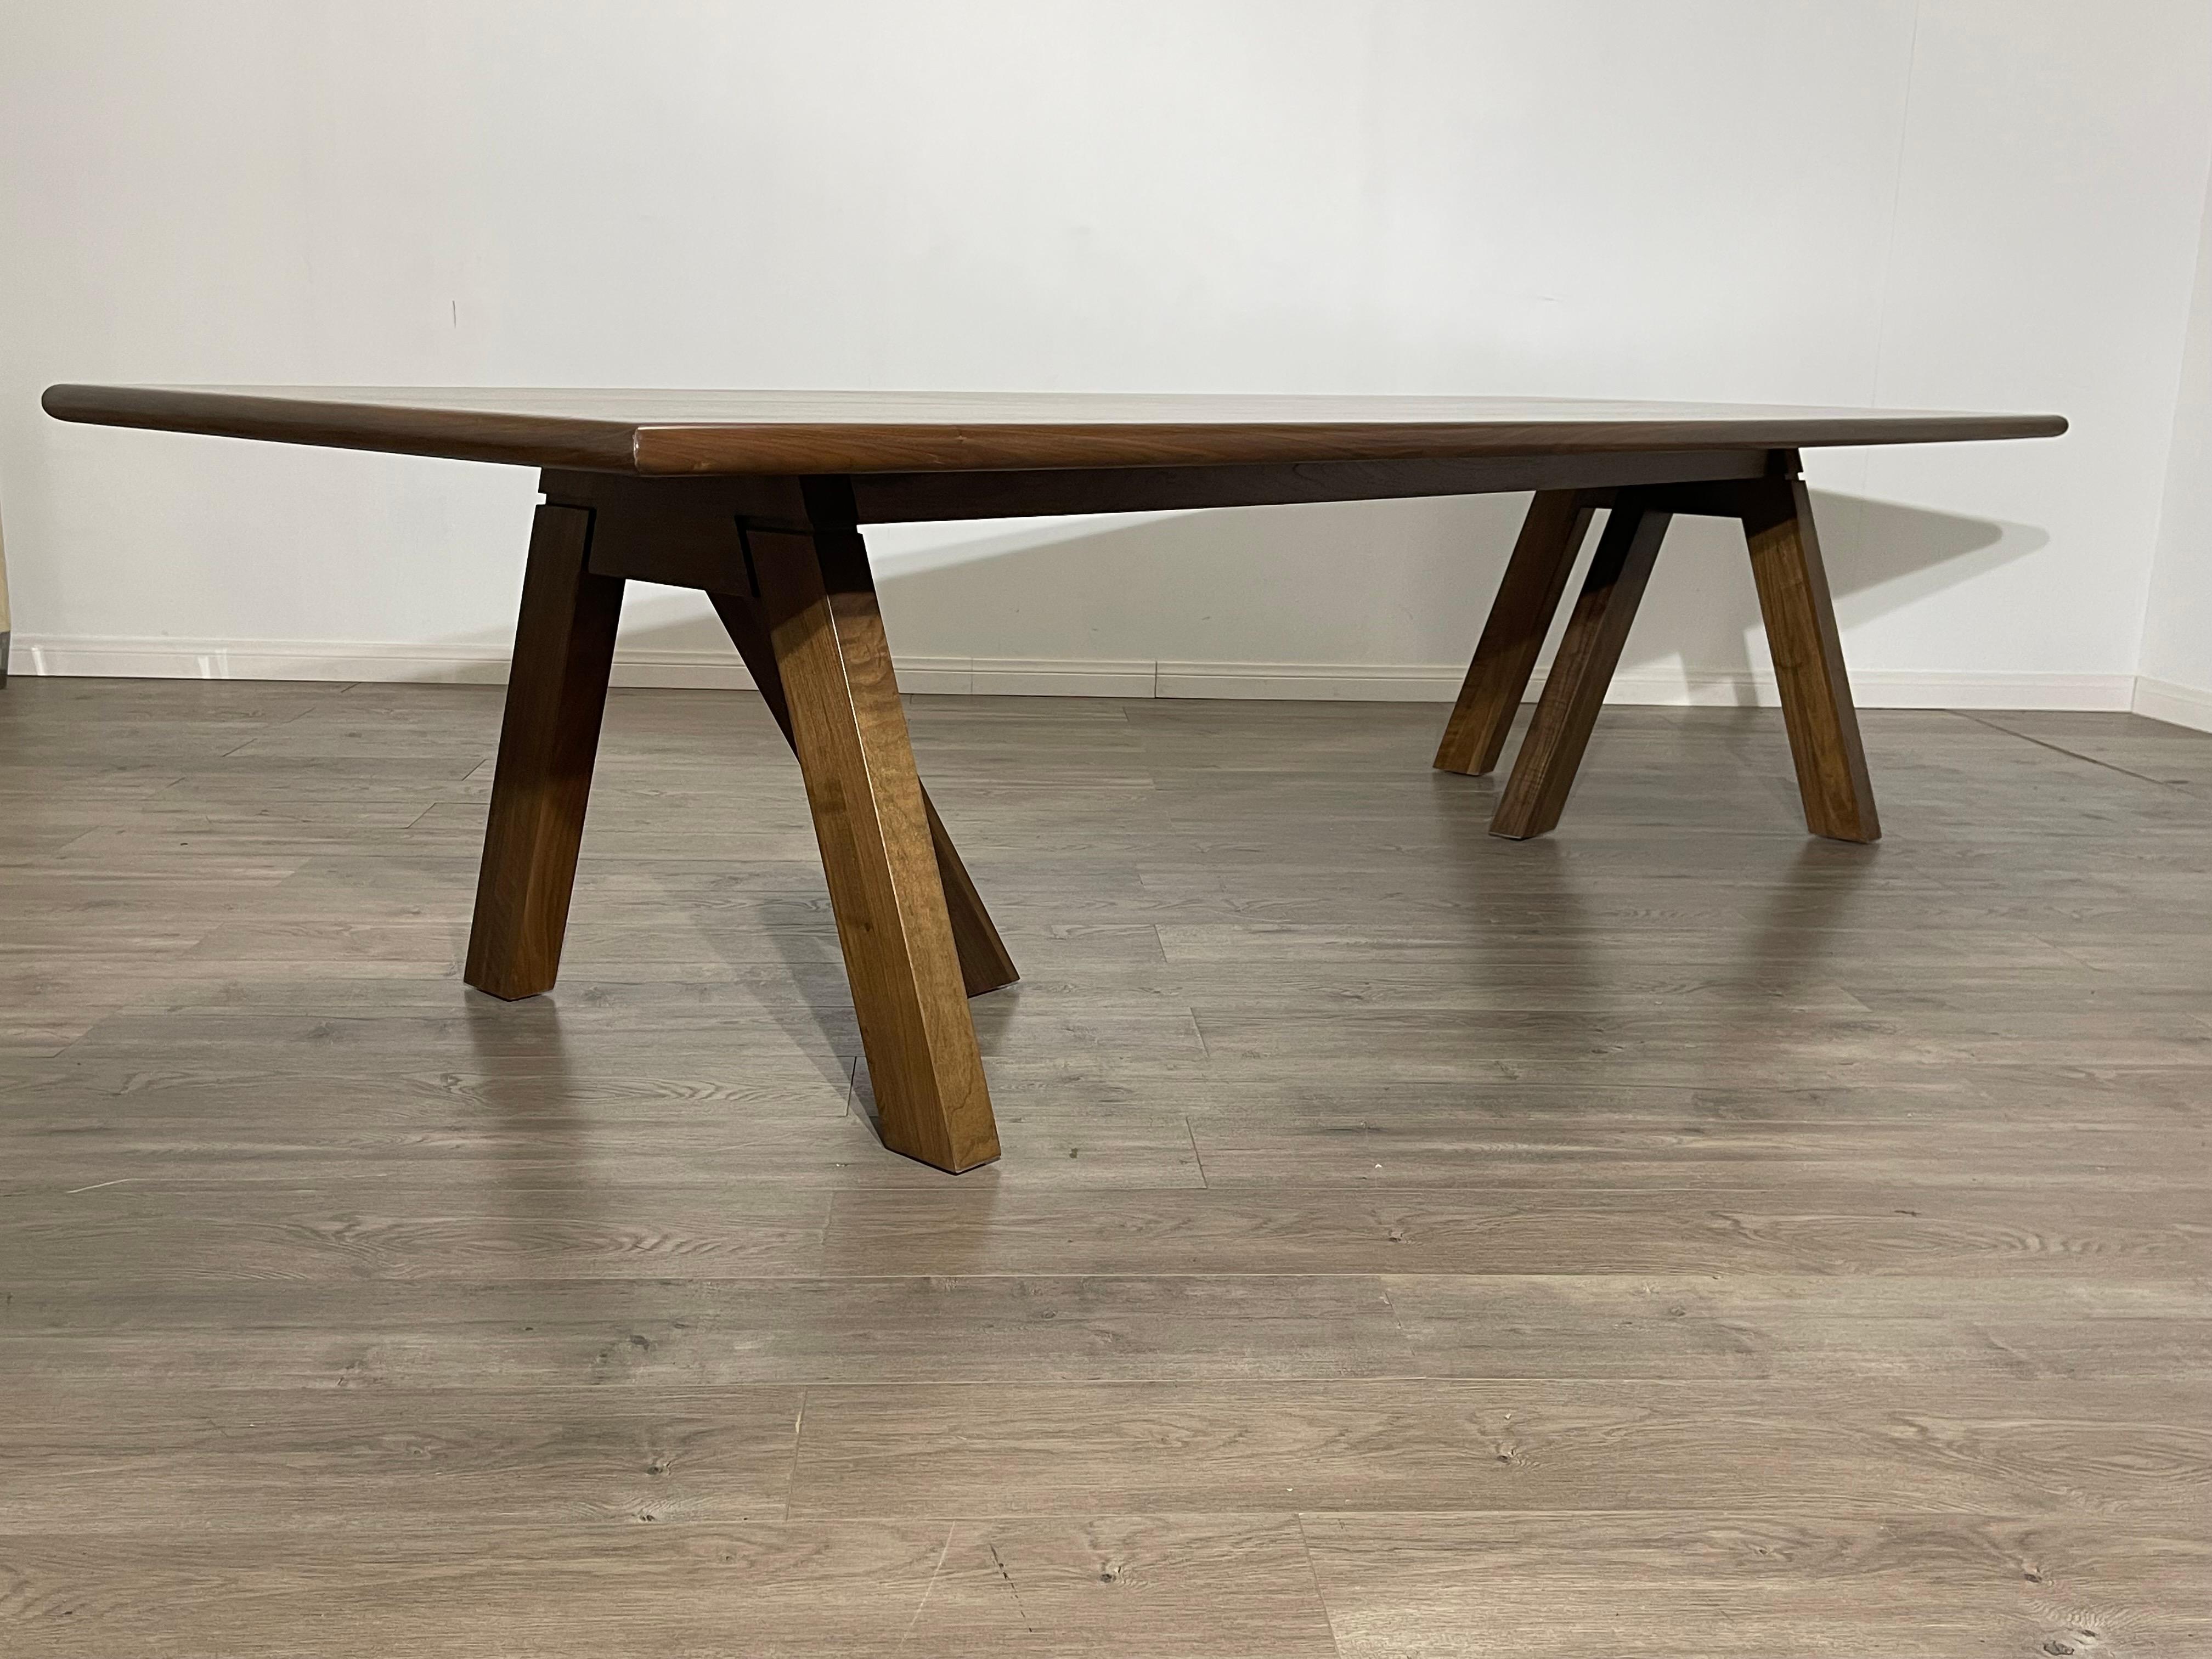 A Modern Custom made to order Dining of Office table. 
Showing the richness of the wood this modern sleek dining table is an exceptional fit for your modern/contemporary home or office. 
Standing on two tripod legs, this table stands 28.5